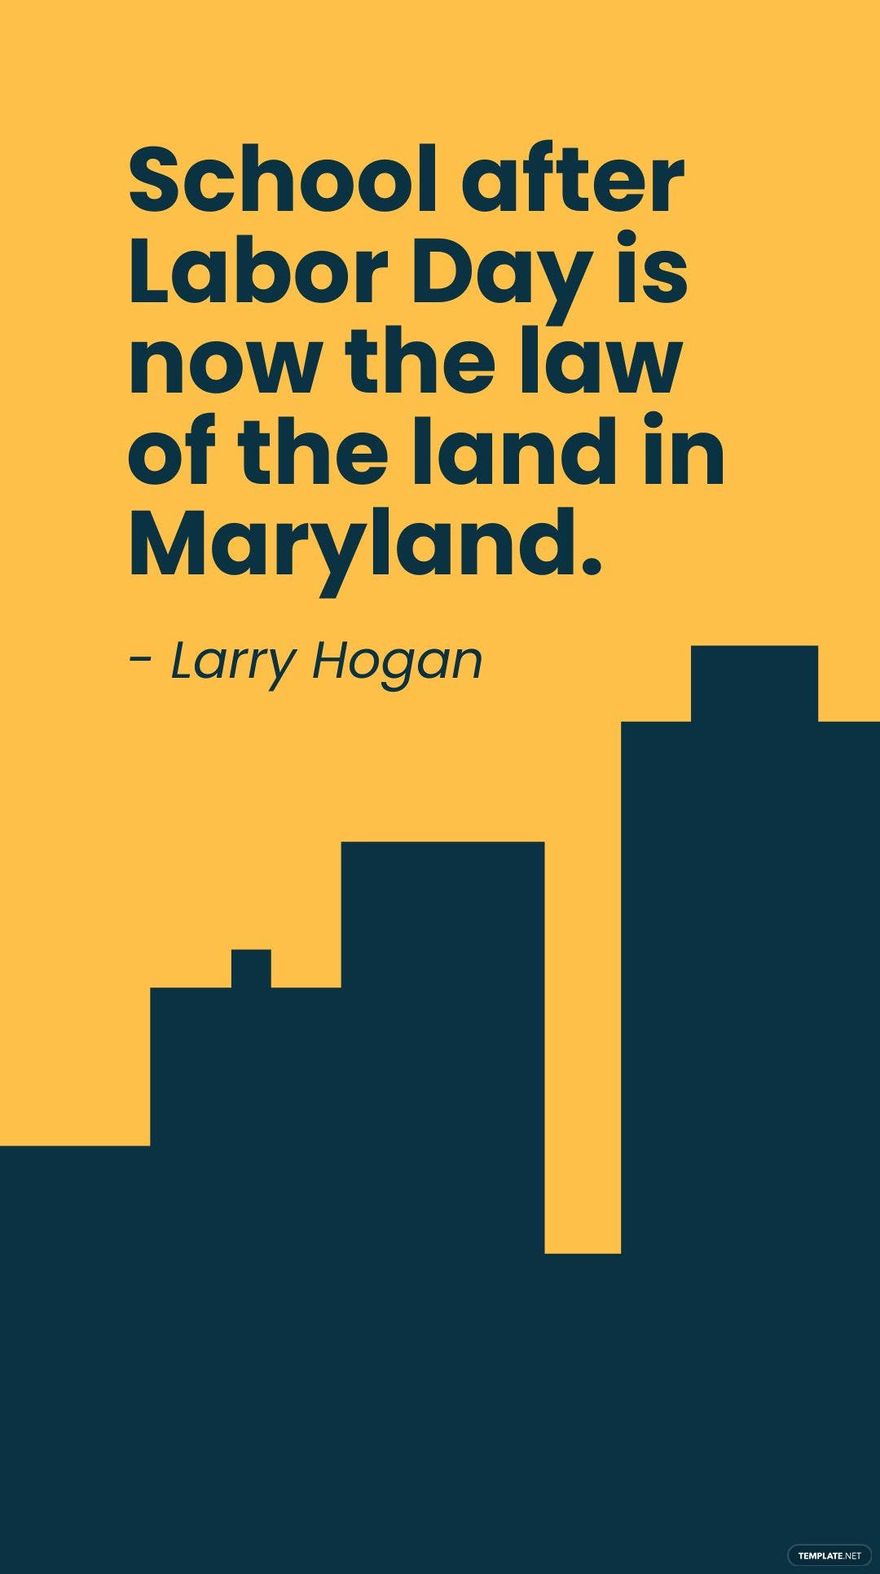 Free Larry Hogan - School after Labor Day is now the law of the land in Maryland.